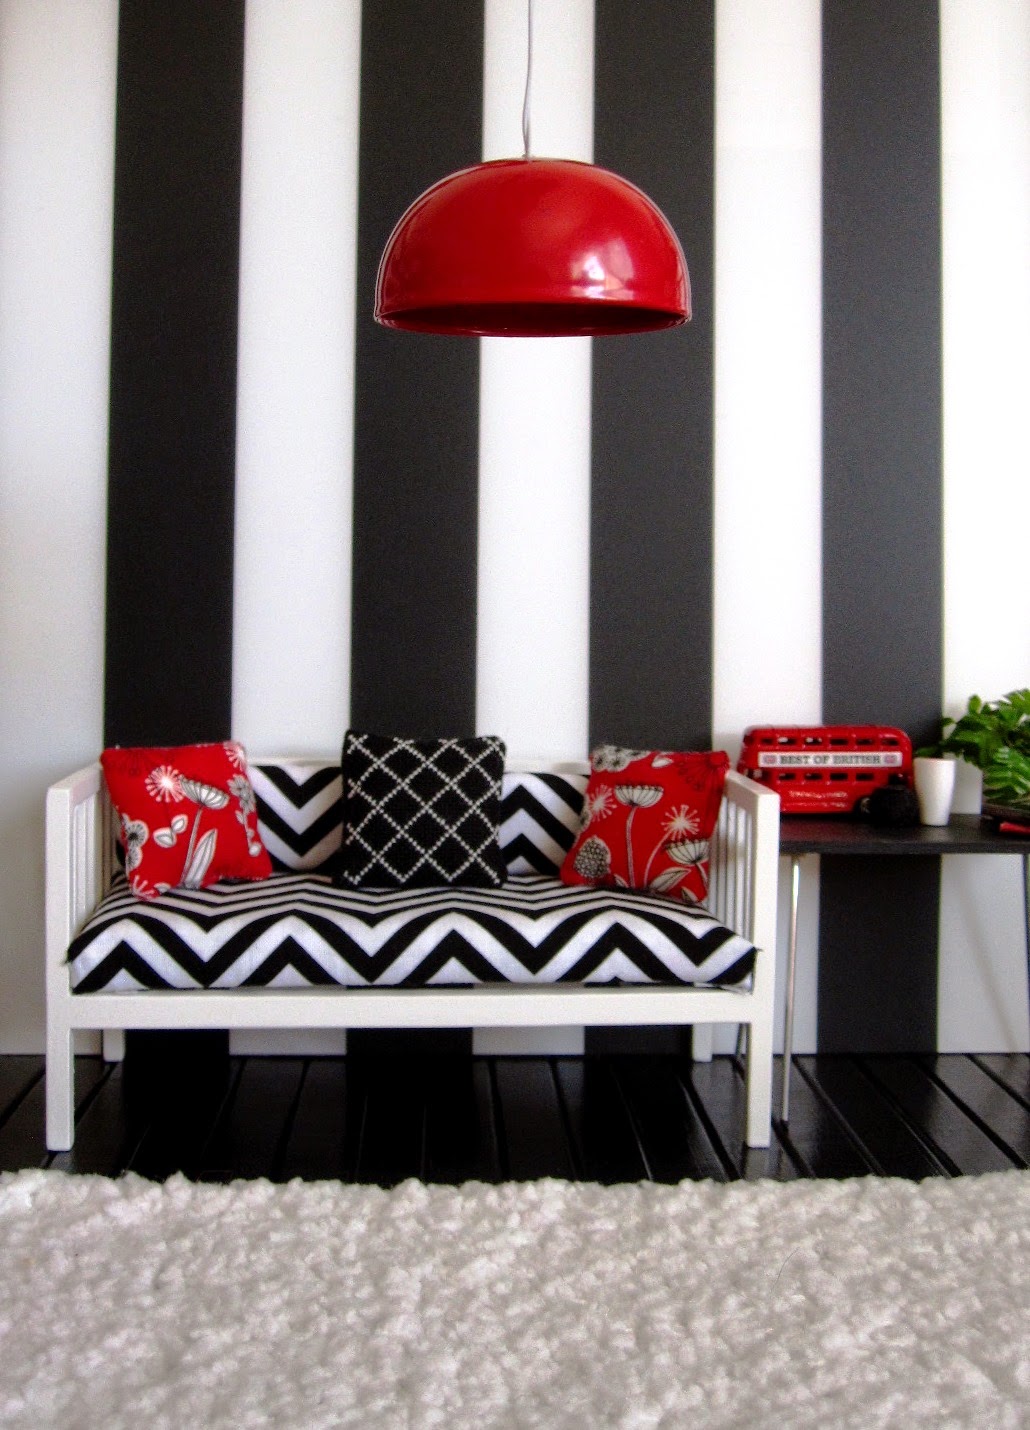 Modern miniature black white and red scene of a day bed with cushions next to a table displaying a model London bus, vases, books and a plant. A large red lightshade hangs from above and a white flokati rug is on the floor.